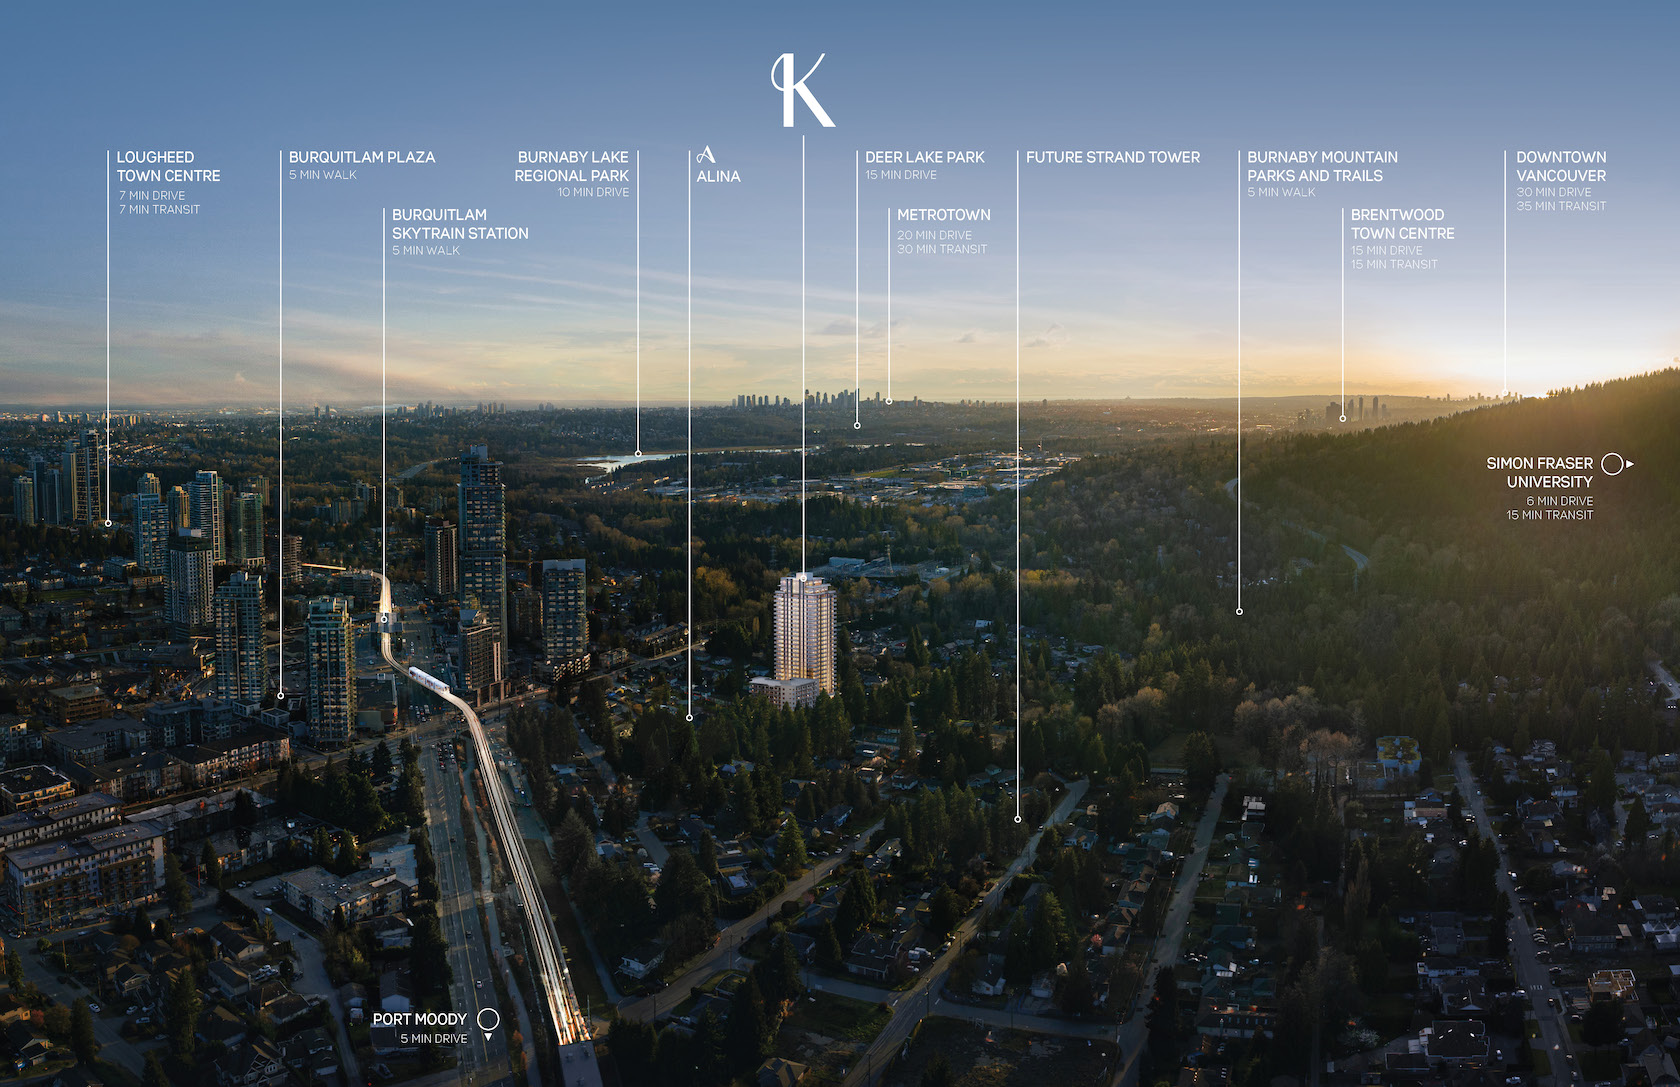 Komo features proximity to nature and convenience